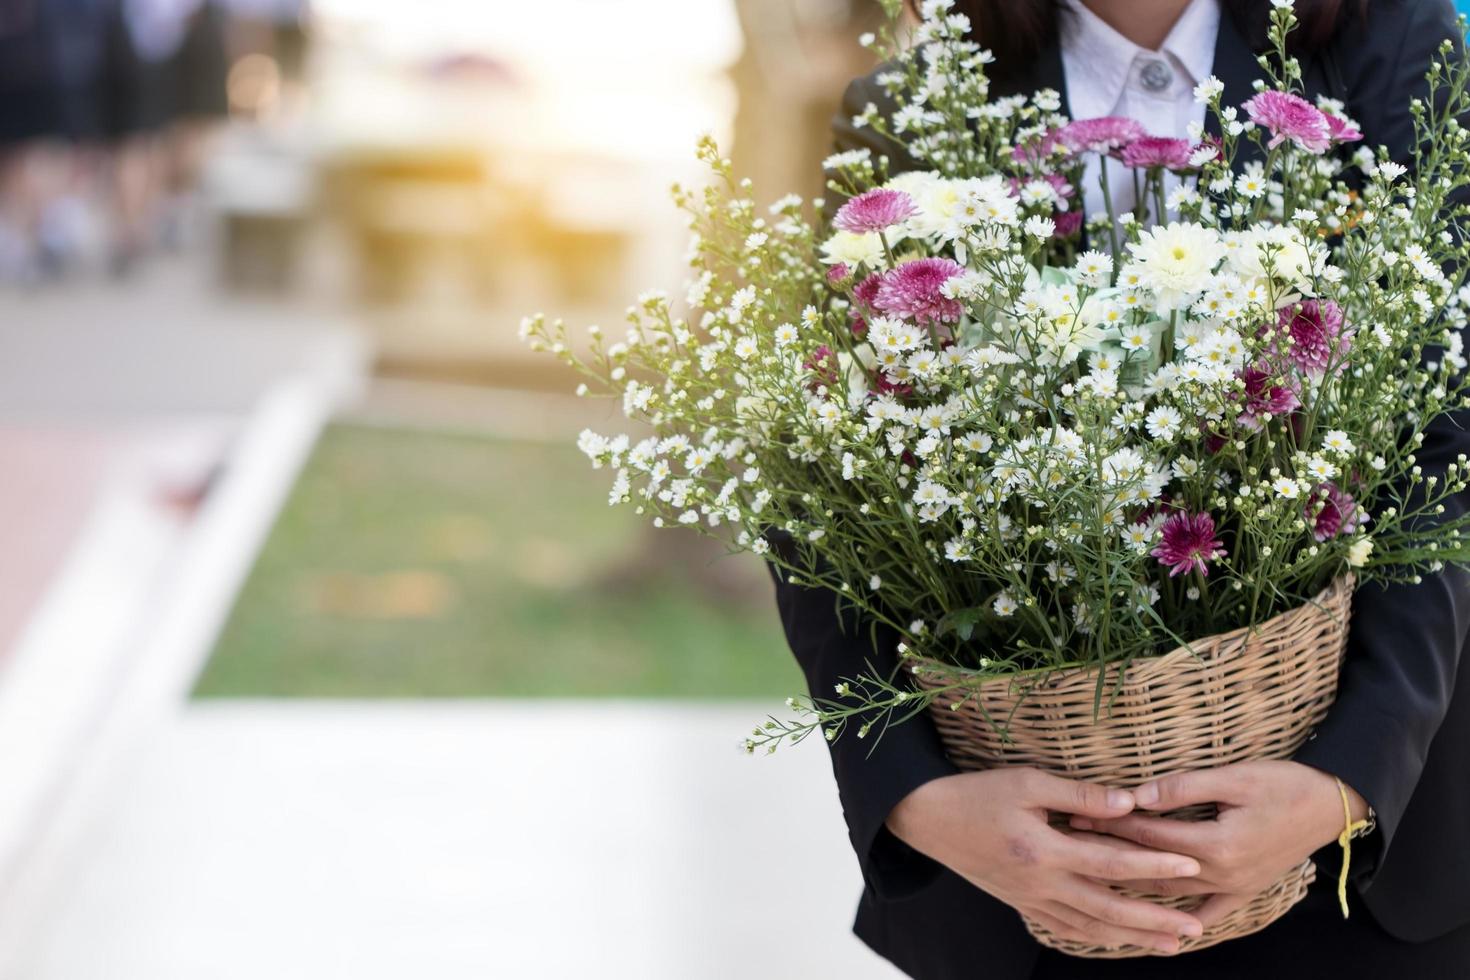 Woman carrying a bouquet of flowers. photo